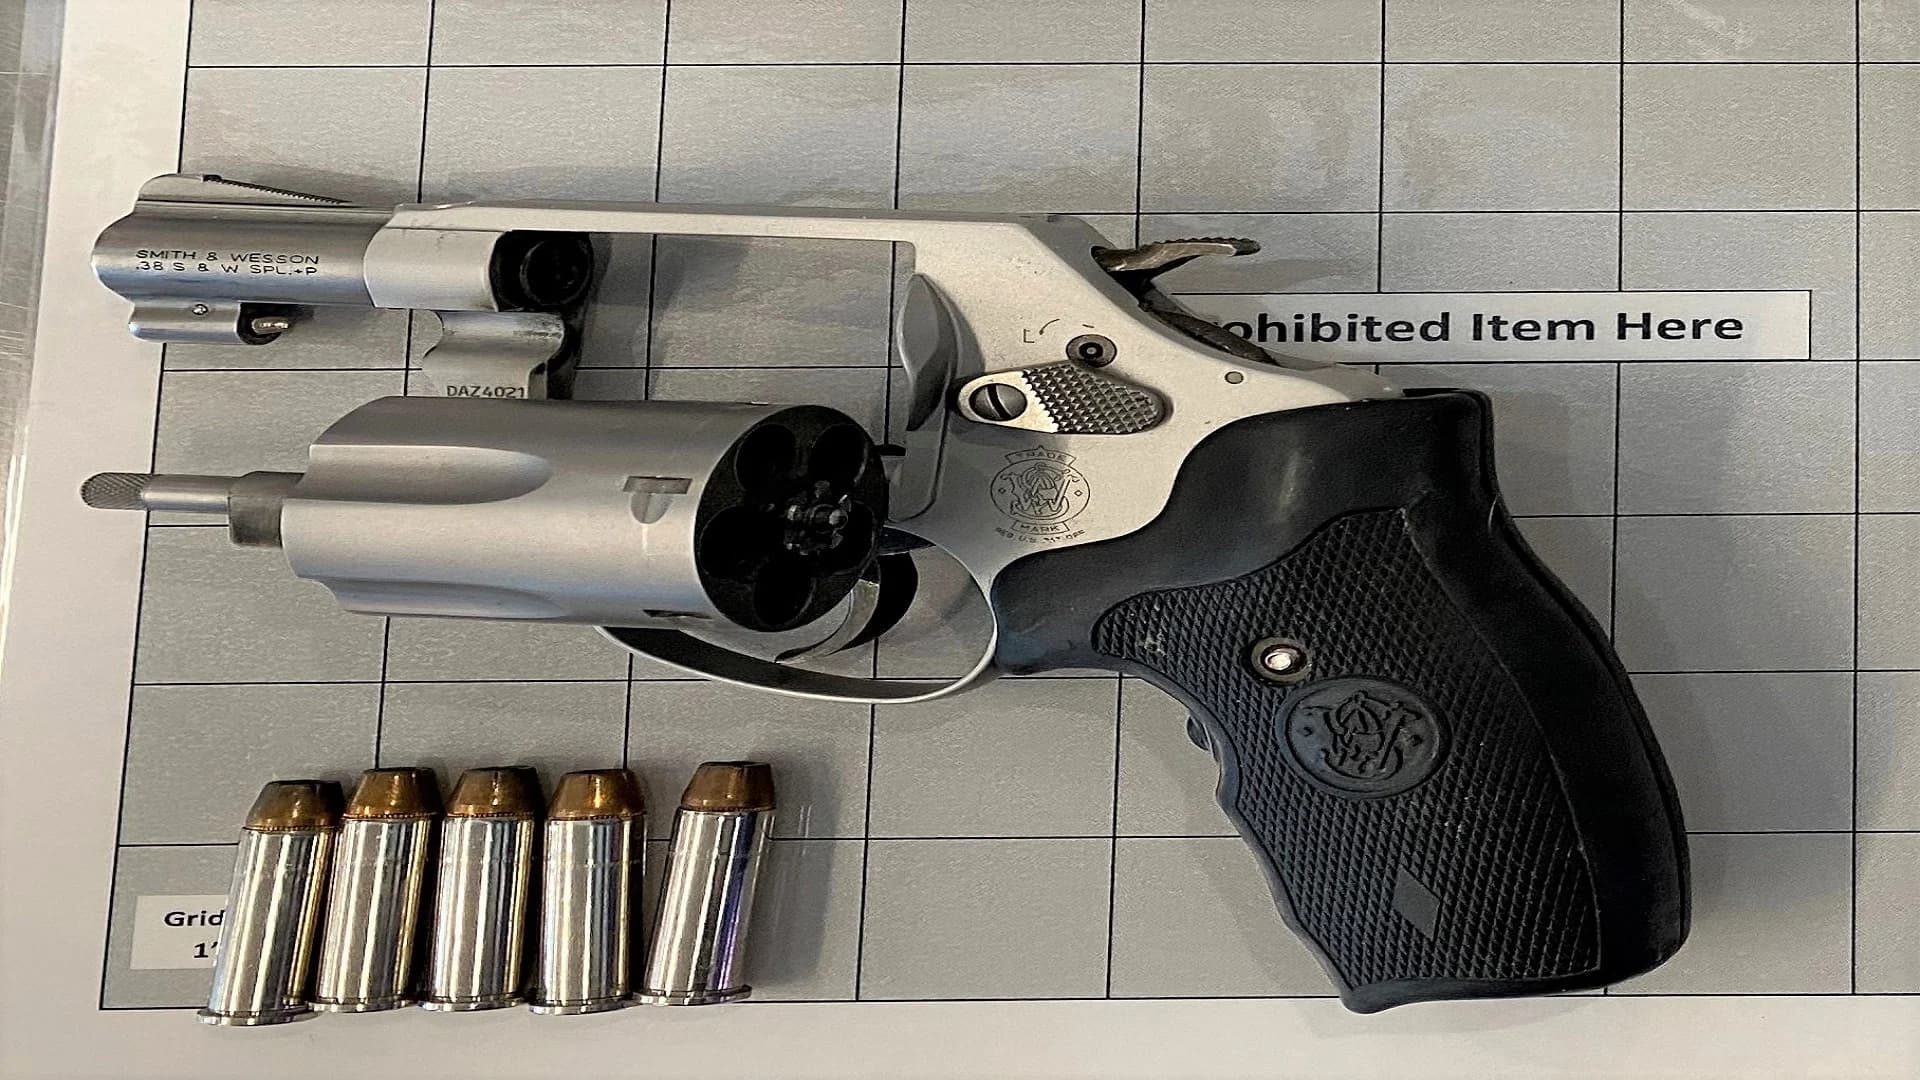 TSA: Number of handguns detected at tri-state airports went up in 2021